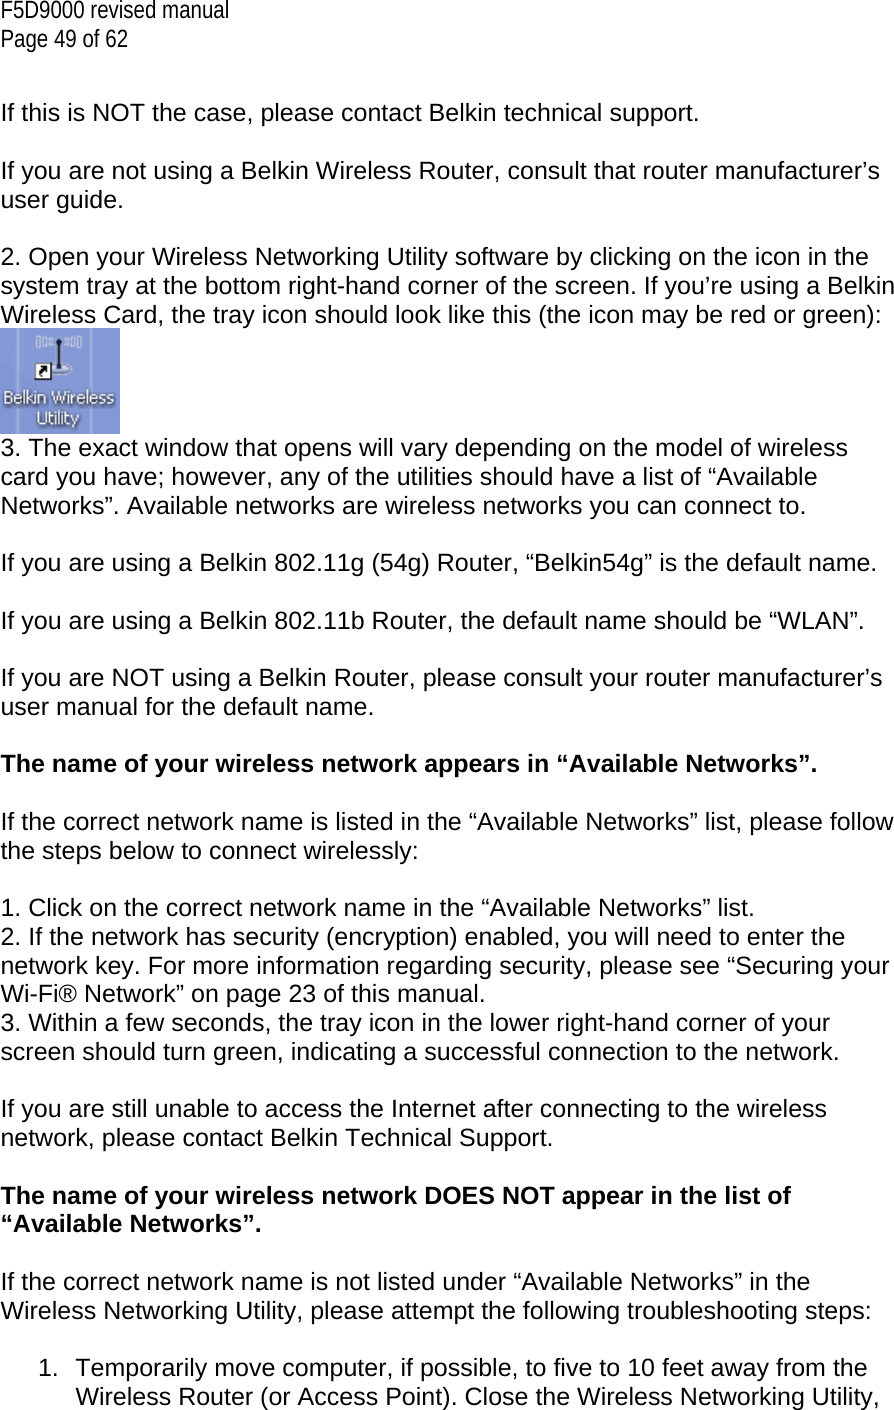 F5D9000 revised manual Page 49 of 62  If this is NOT the case, please contact Belkin technical support.  If you are not using a Belkin Wireless Router, consult that router manufacturer’s user guide.  2. Open your Wireless Networking Utility software by clicking on the icon in the system tray at the bottom right-hand corner of the screen. If you’re using a Belkin Wireless Card, the tray icon should look like this (the icon may be red or green):  3. The exact window that opens will vary depending on the model of wireless card you have; however, any of the utilities should have a list of “Available Networks”. Available networks are wireless networks you can connect to.  If you are using a Belkin 802.11g (54g) Router, “Belkin54g” is the default name.  If you are using a Belkin 802.11b Router, the default name should be “WLAN”.  If you are NOT using a Belkin Router, please consult your router manufacturer’s user manual for the default name.  The name of your wireless network appears in “Available Networks”.  If the correct network name is listed in the “Available Networks” list, please follow the steps below to connect wirelessly:  1. Click on the correct network name in the “Available Networks” list. 2. If the network has security (encryption) enabled, you will need to enter the network key. For more information regarding security, please see “Securing your Wi-Fi® Network” on page 23 of this manual. 3. Within a few seconds, the tray icon in the lower right-hand corner of your screen should turn green, indicating a successful connection to the network.  If you are still unable to access the Internet after connecting to the wireless network, please contact Belkin Technical Support.  The name of your wireless network DOES NOT appear in the list of “Available Networks”.  If the correct network name is not listed under “Available Networks” in the Wireless Networking Utility, please attempt the following troubleshooting steps:  1.  Temporarily move computer, if possible, to five to 10 feet away from the Wireless Router (or Access Point). Close the Wireless Networking Utility, 